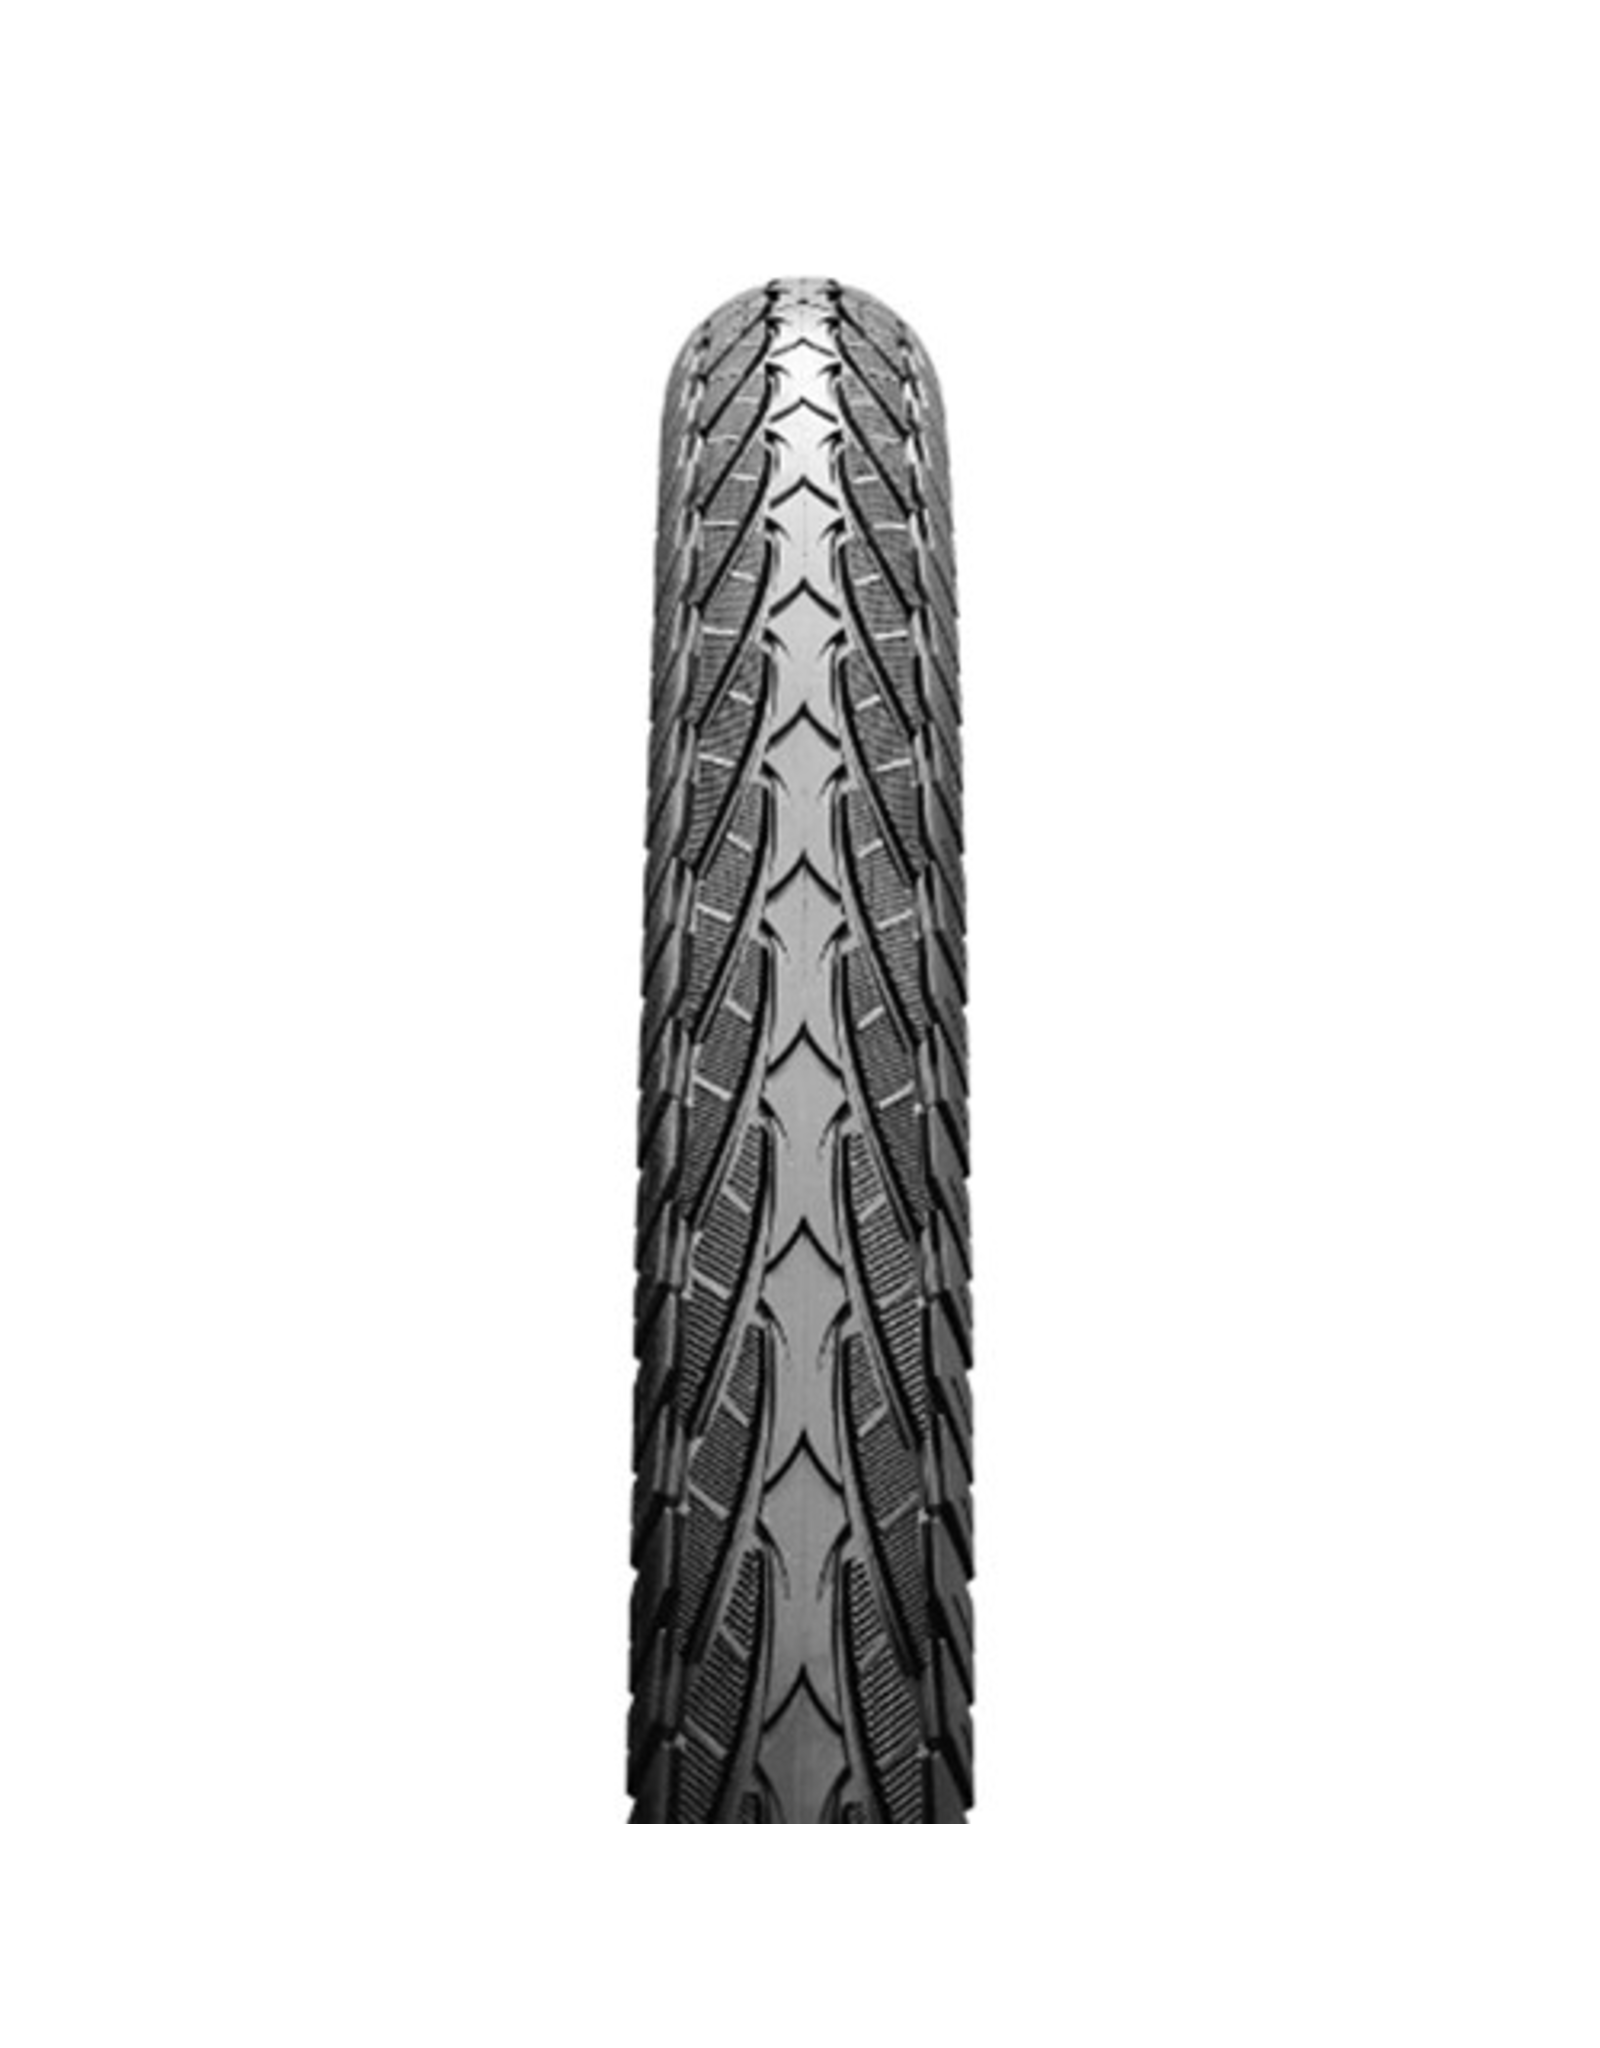 MAXXIS MAXXIS OVERDRIVE 26 X 1.75 MAXX PROTECT WIRE 27 TPI TYRE